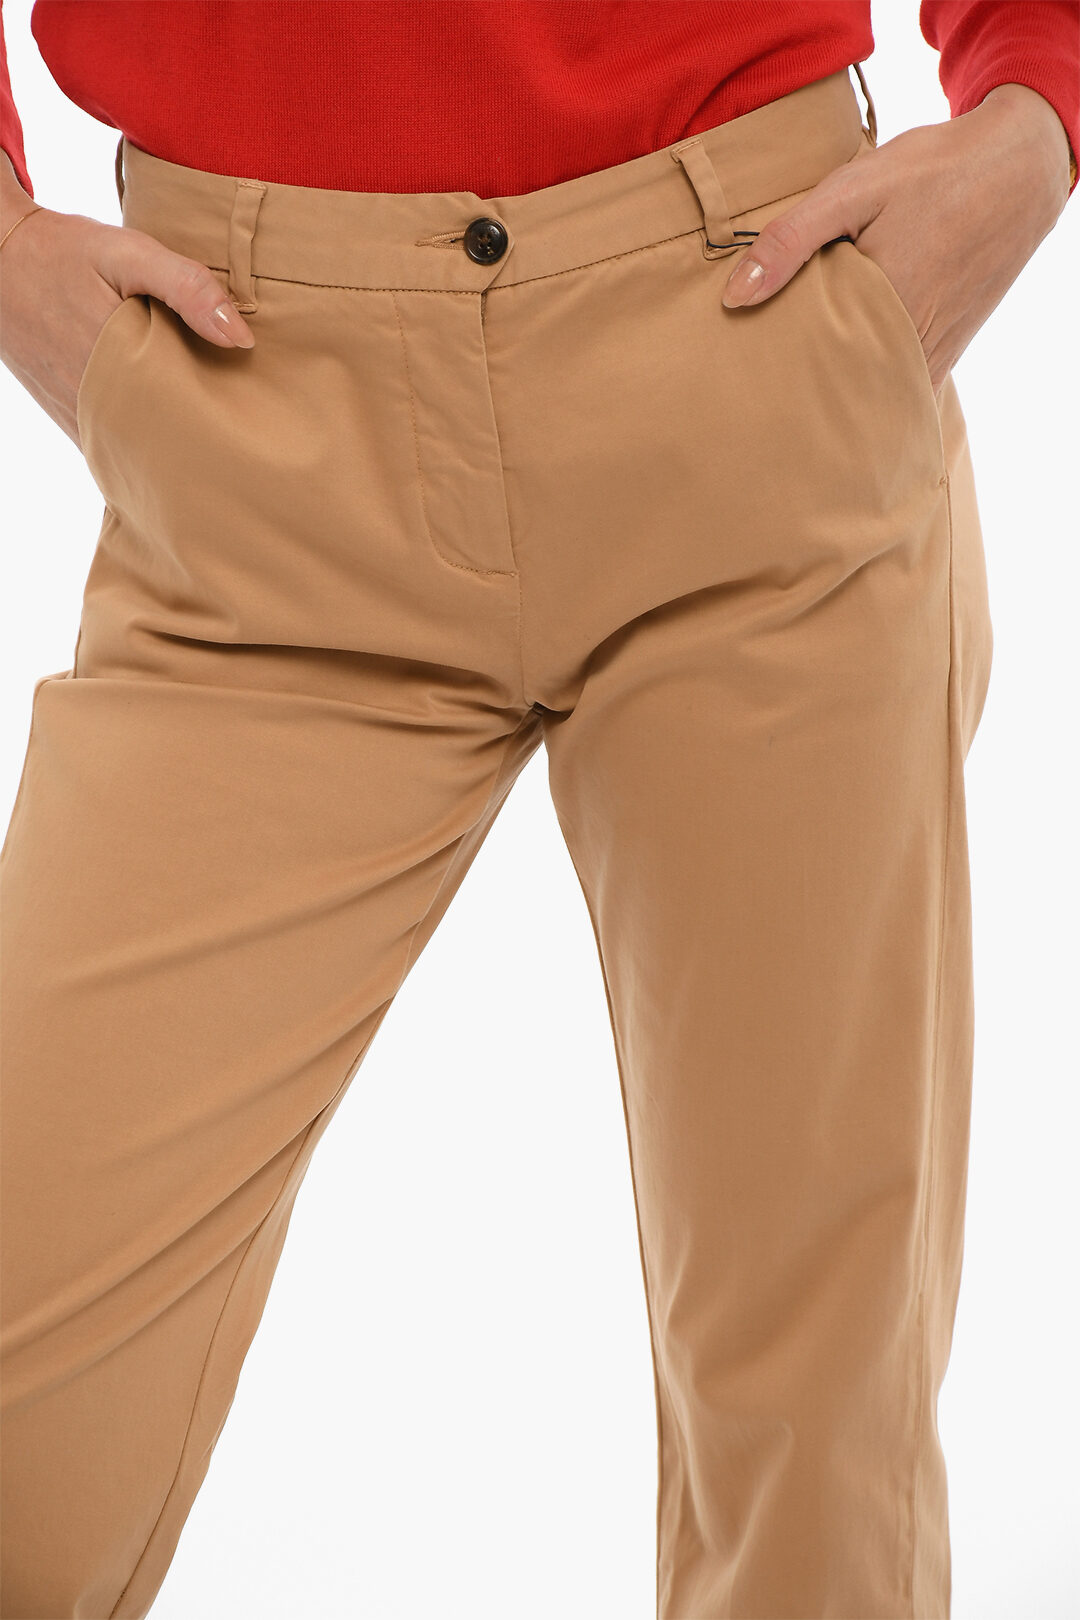 https://data.glamood.com/imgprodotto/cotton-stretch-american-pants-with-belt-loops_1386586_zoom.jpg